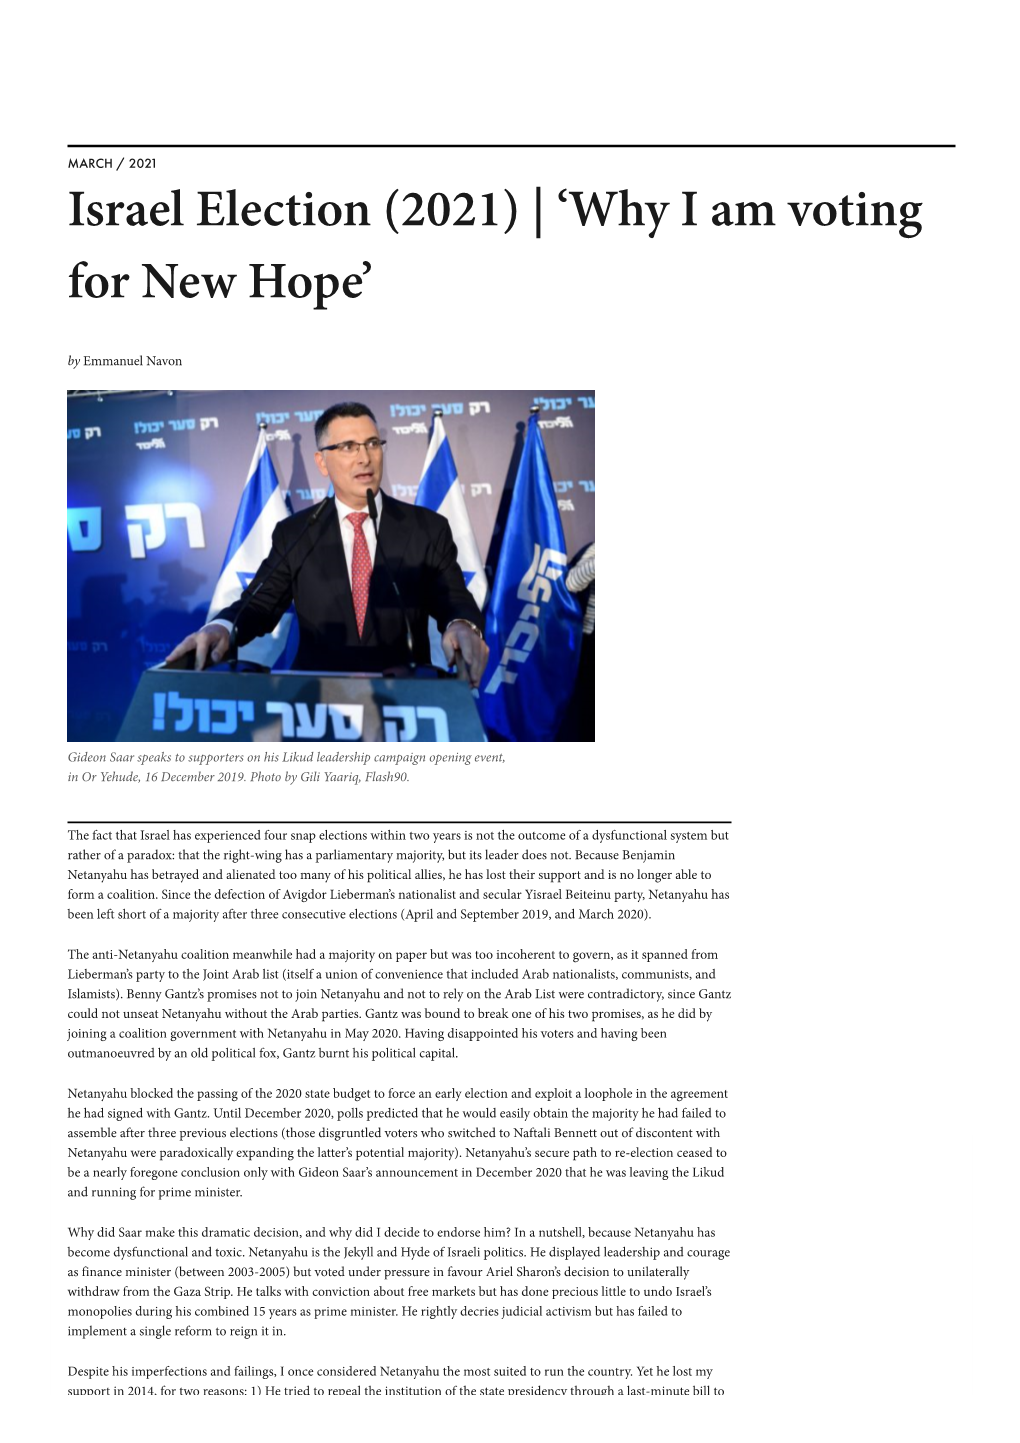 Israel Election (2021) | ‘Why I Am Voting for New Hope’ by Emmanuel Navon